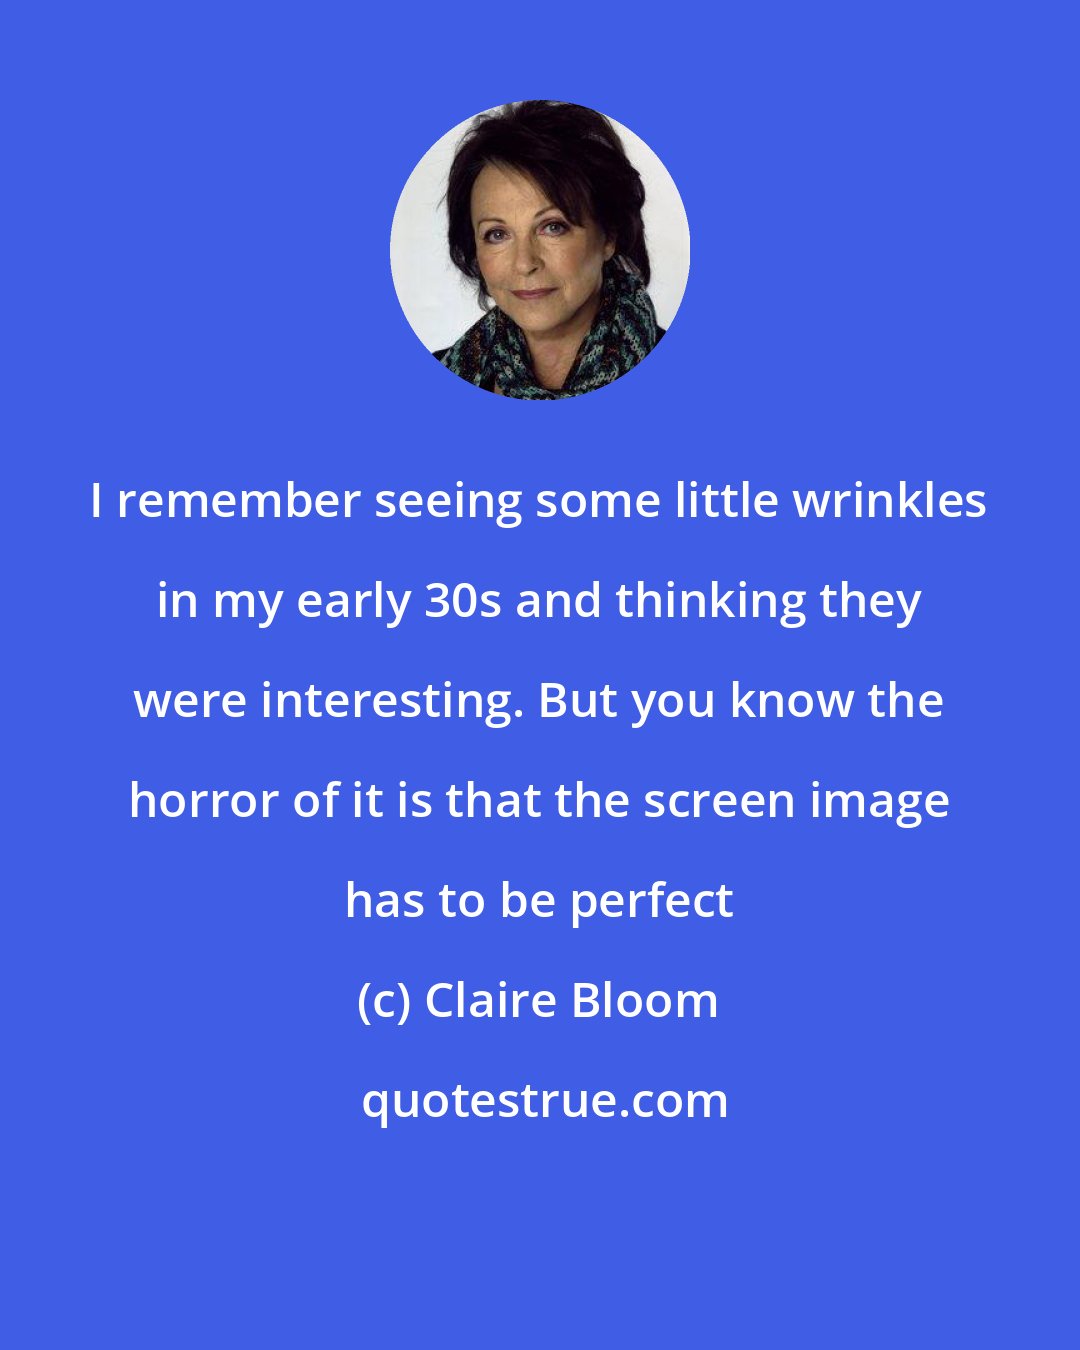 Claire Bloom: I remember seeing some little wrinkles in my early 30s and thinking they were interesting. But you know the horror of it is that the screen image has to be perfect